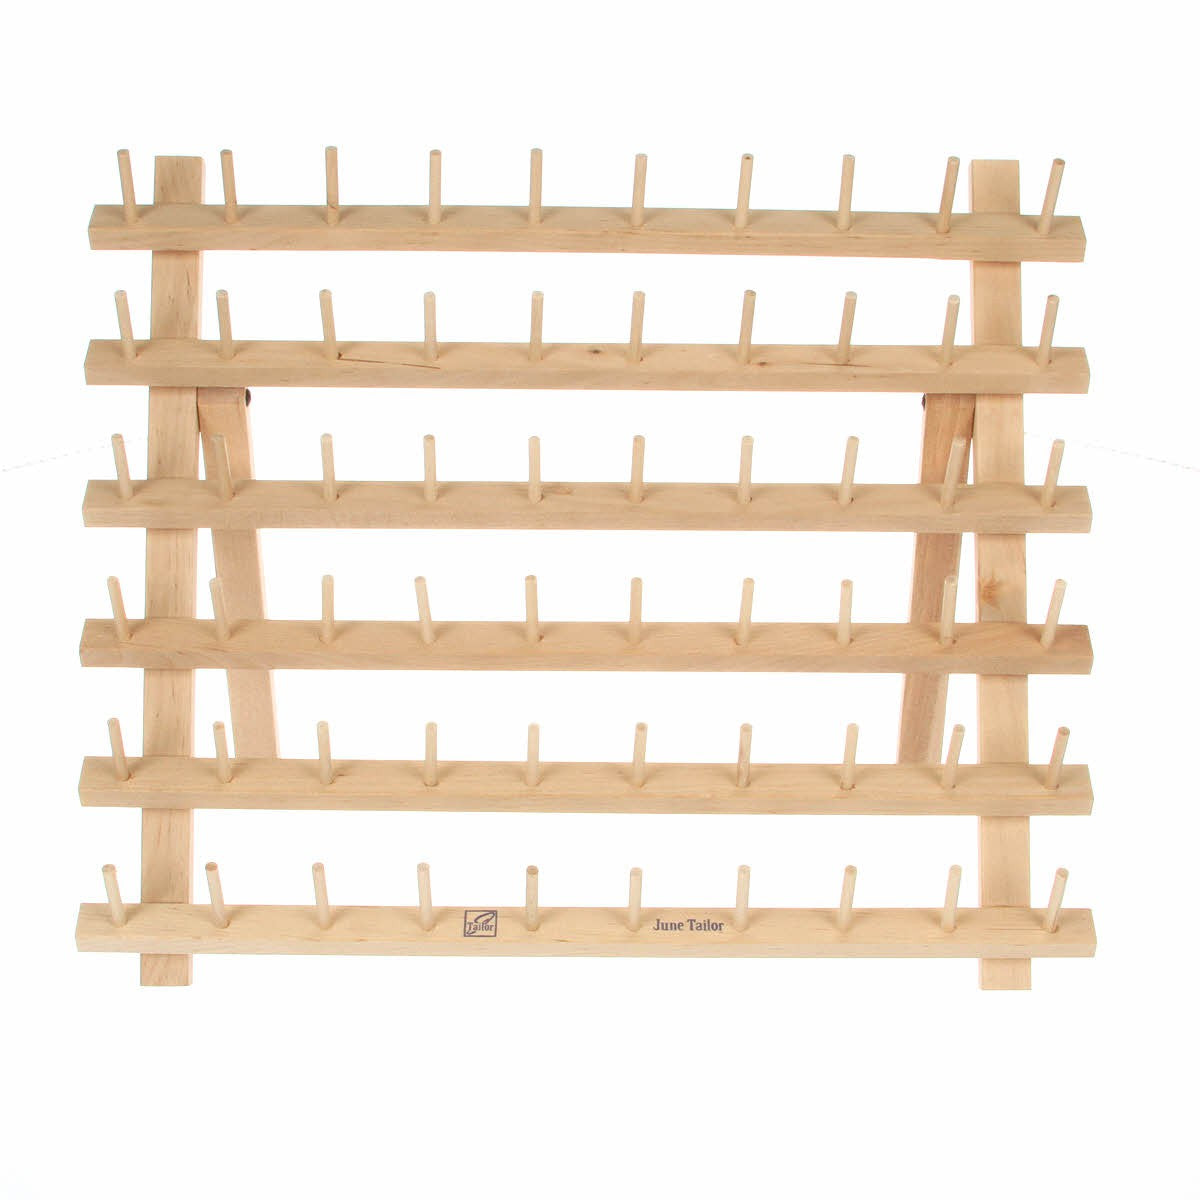 Wooden Thread Rack Sewing and Embroidery Thread Holder, 60 Spools, 2 Pack 